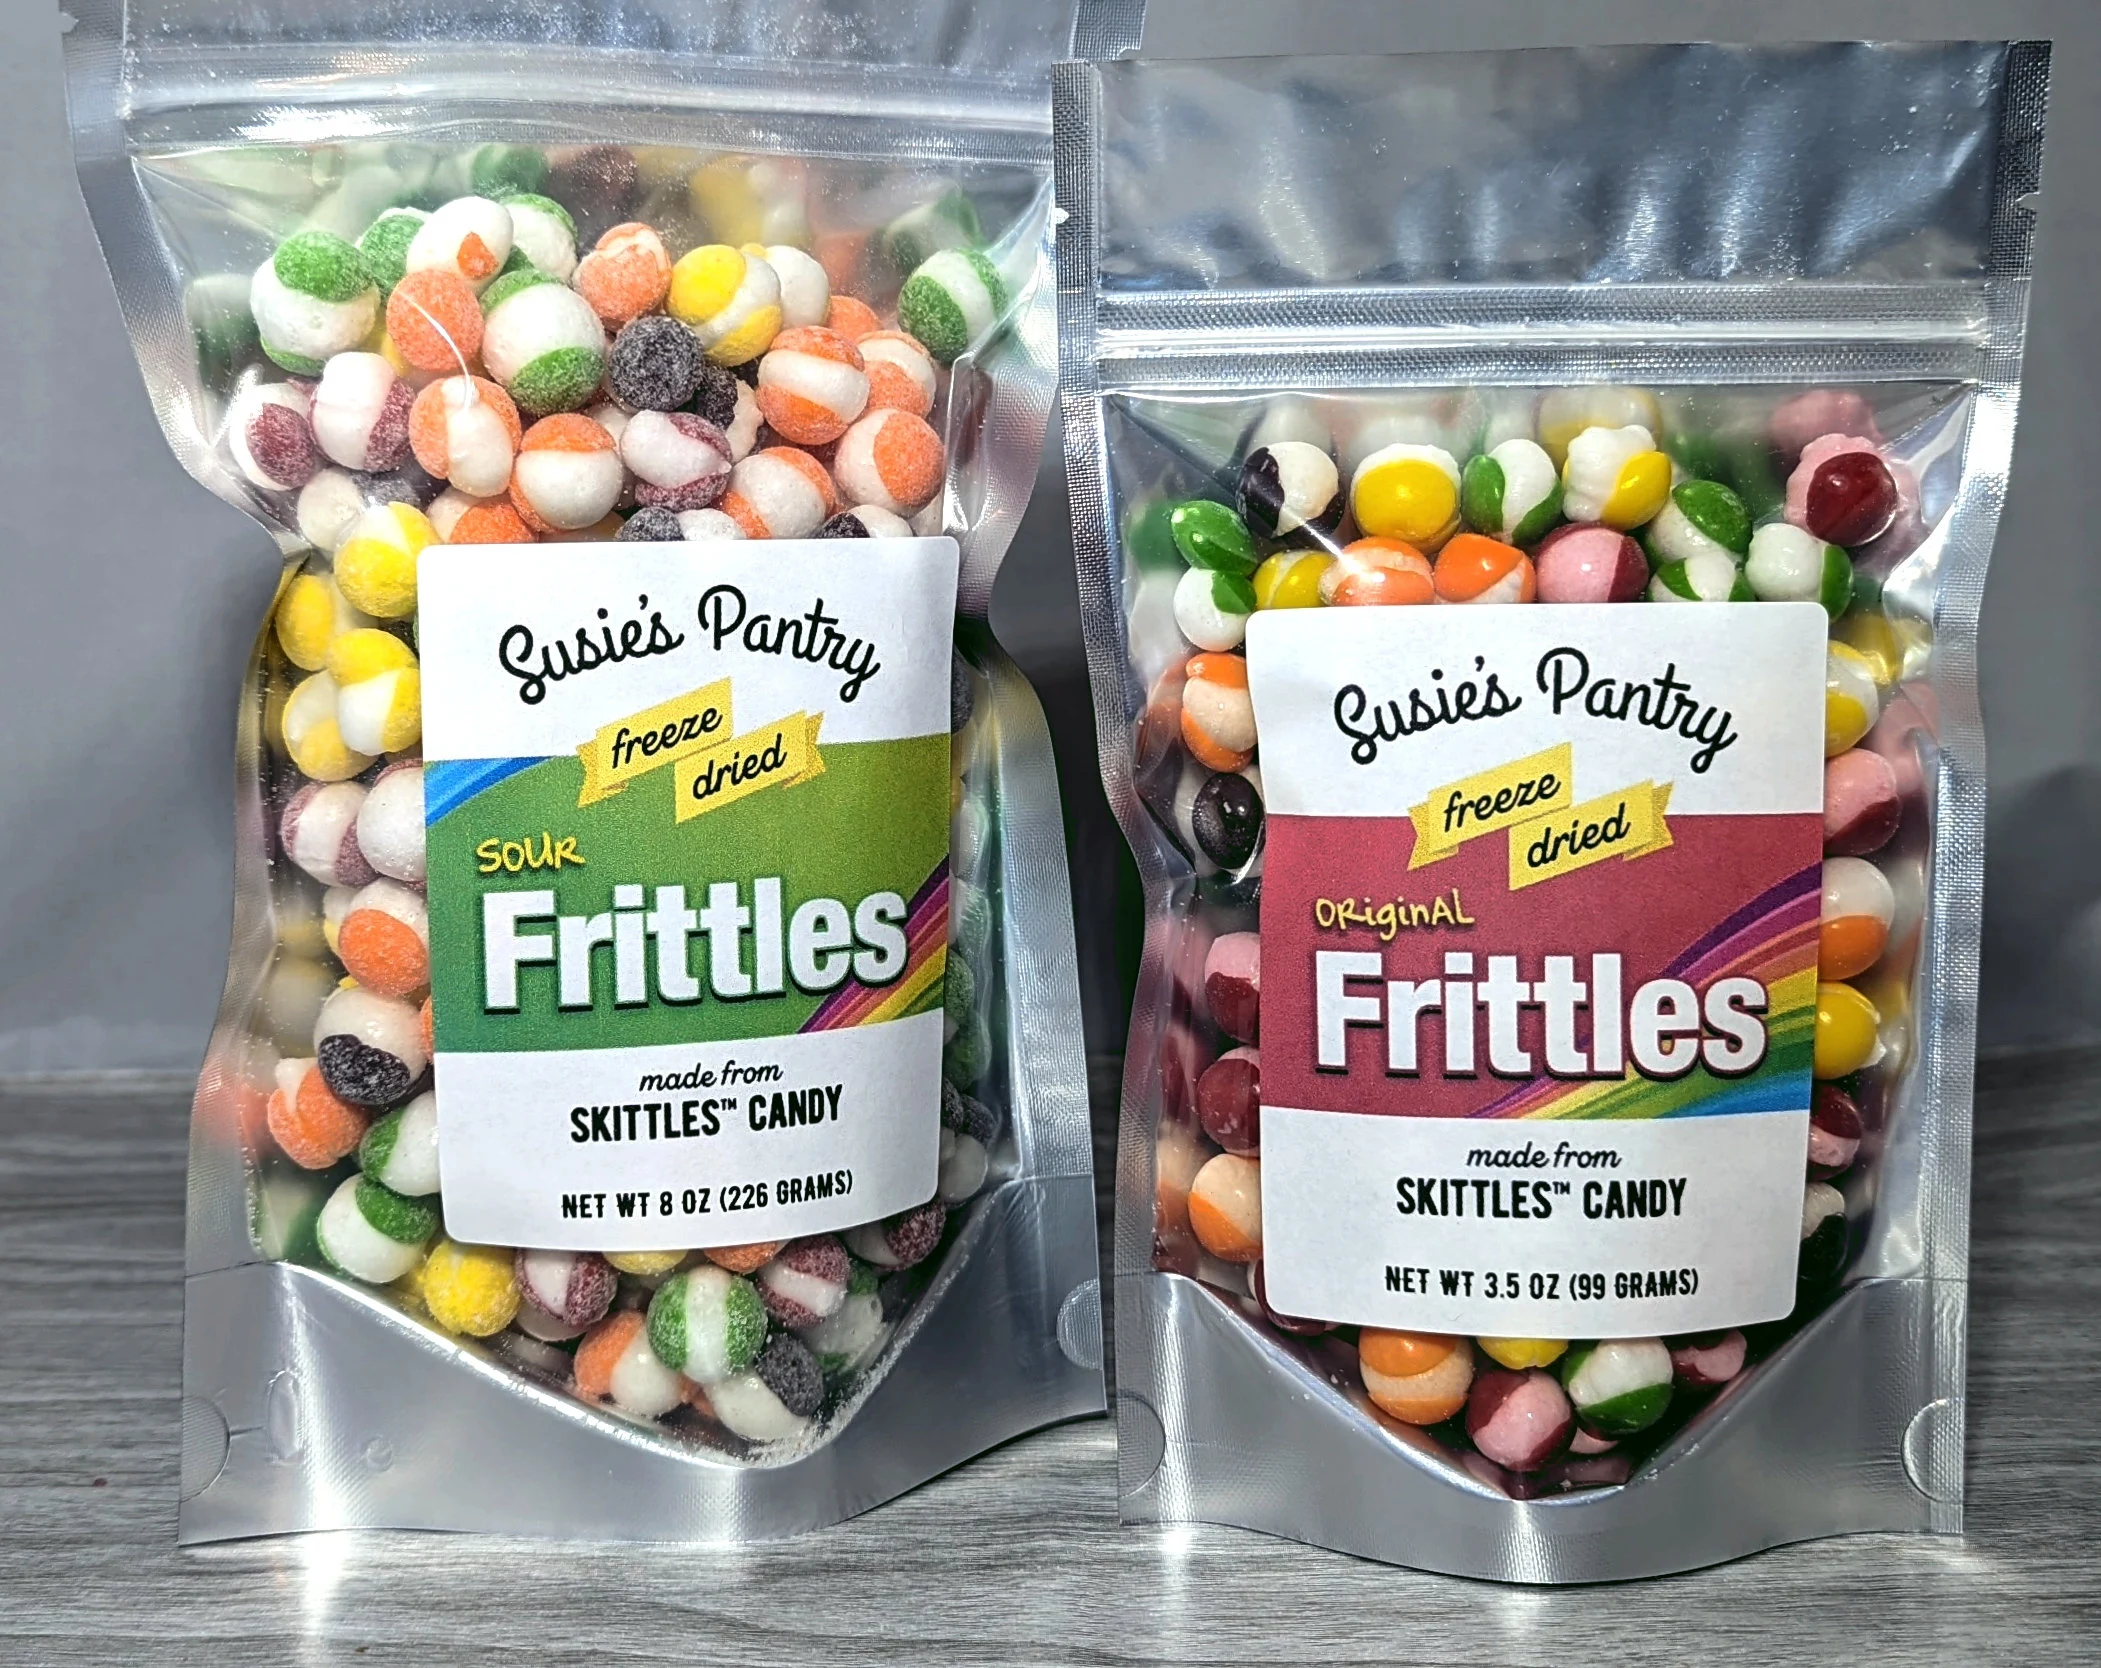 reeze dried Skittles